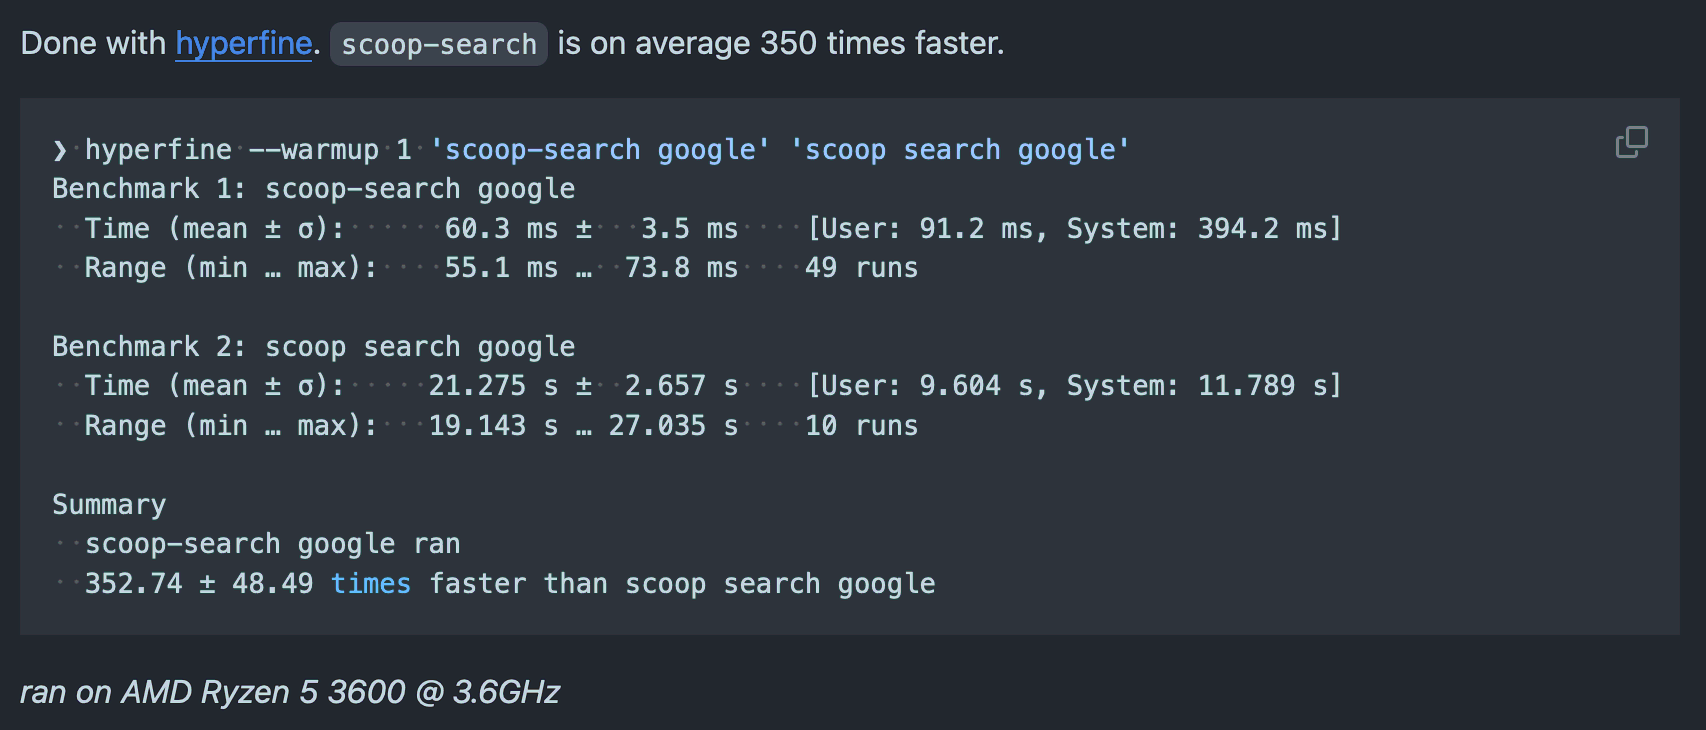 Benchmark showing scoop-search is 350 times faster than scoop search